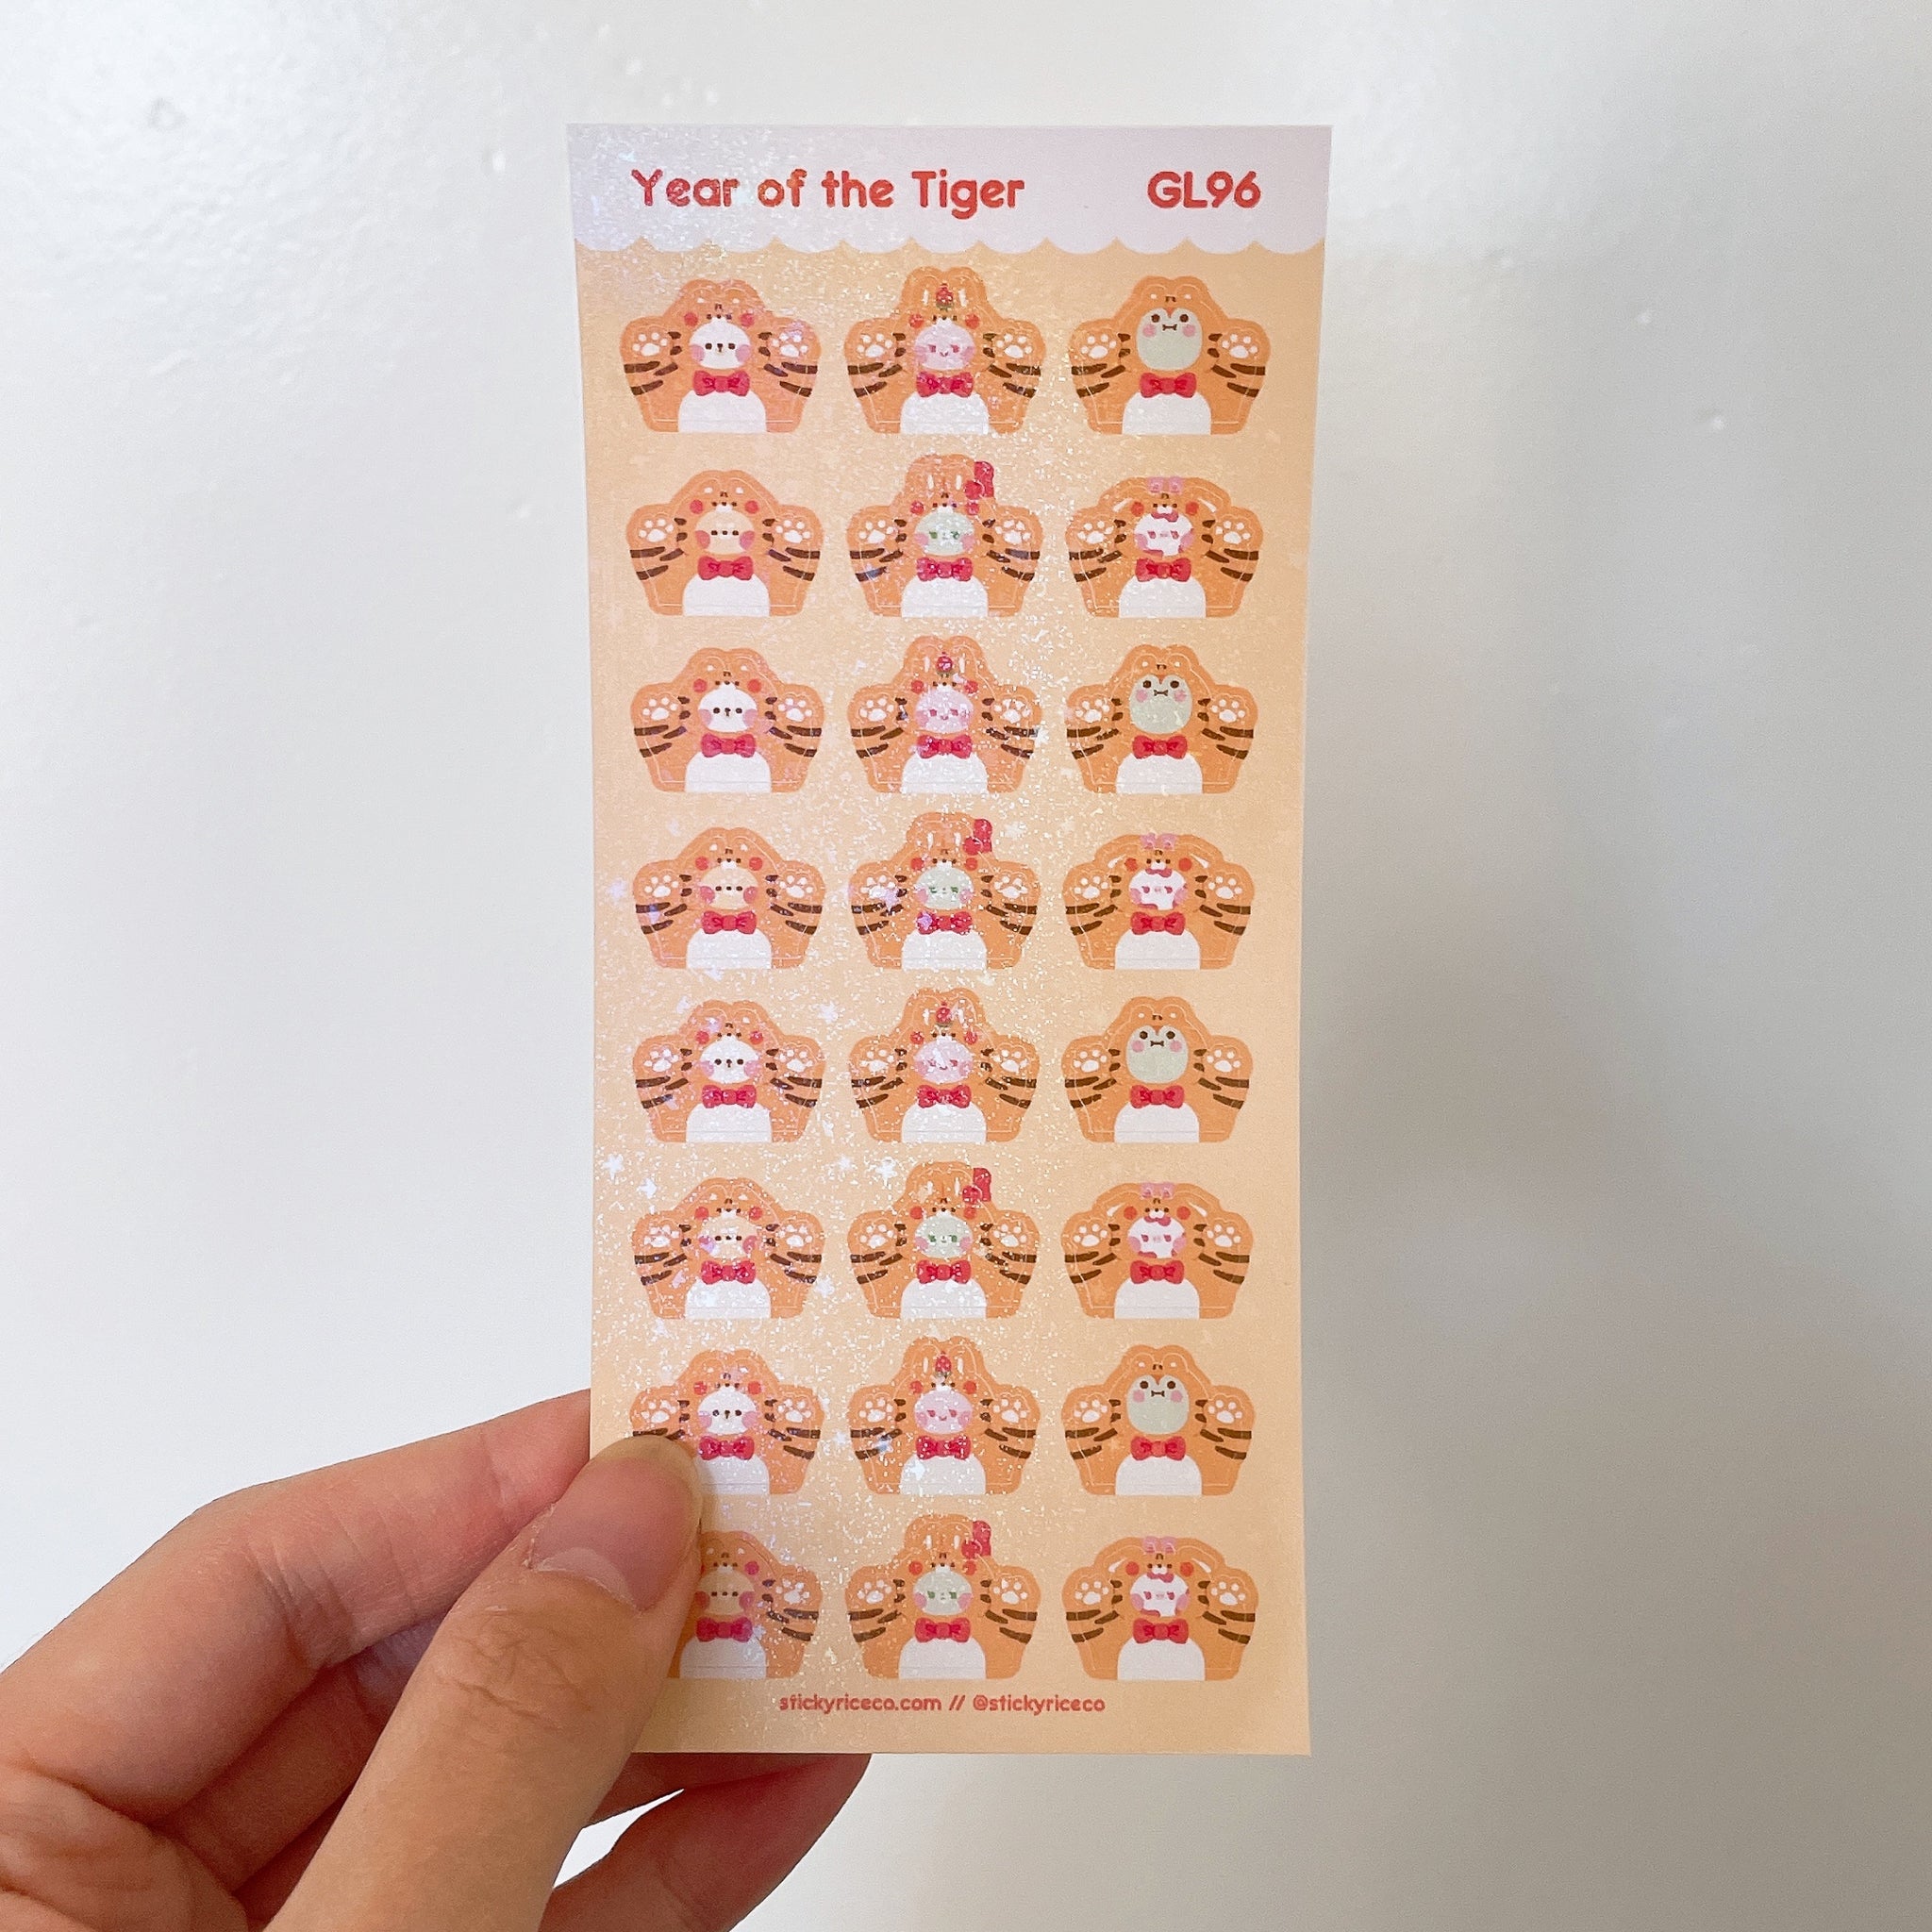 Year of the Tiger Costumes Holographic Glitter Vinyl Deco Stickers